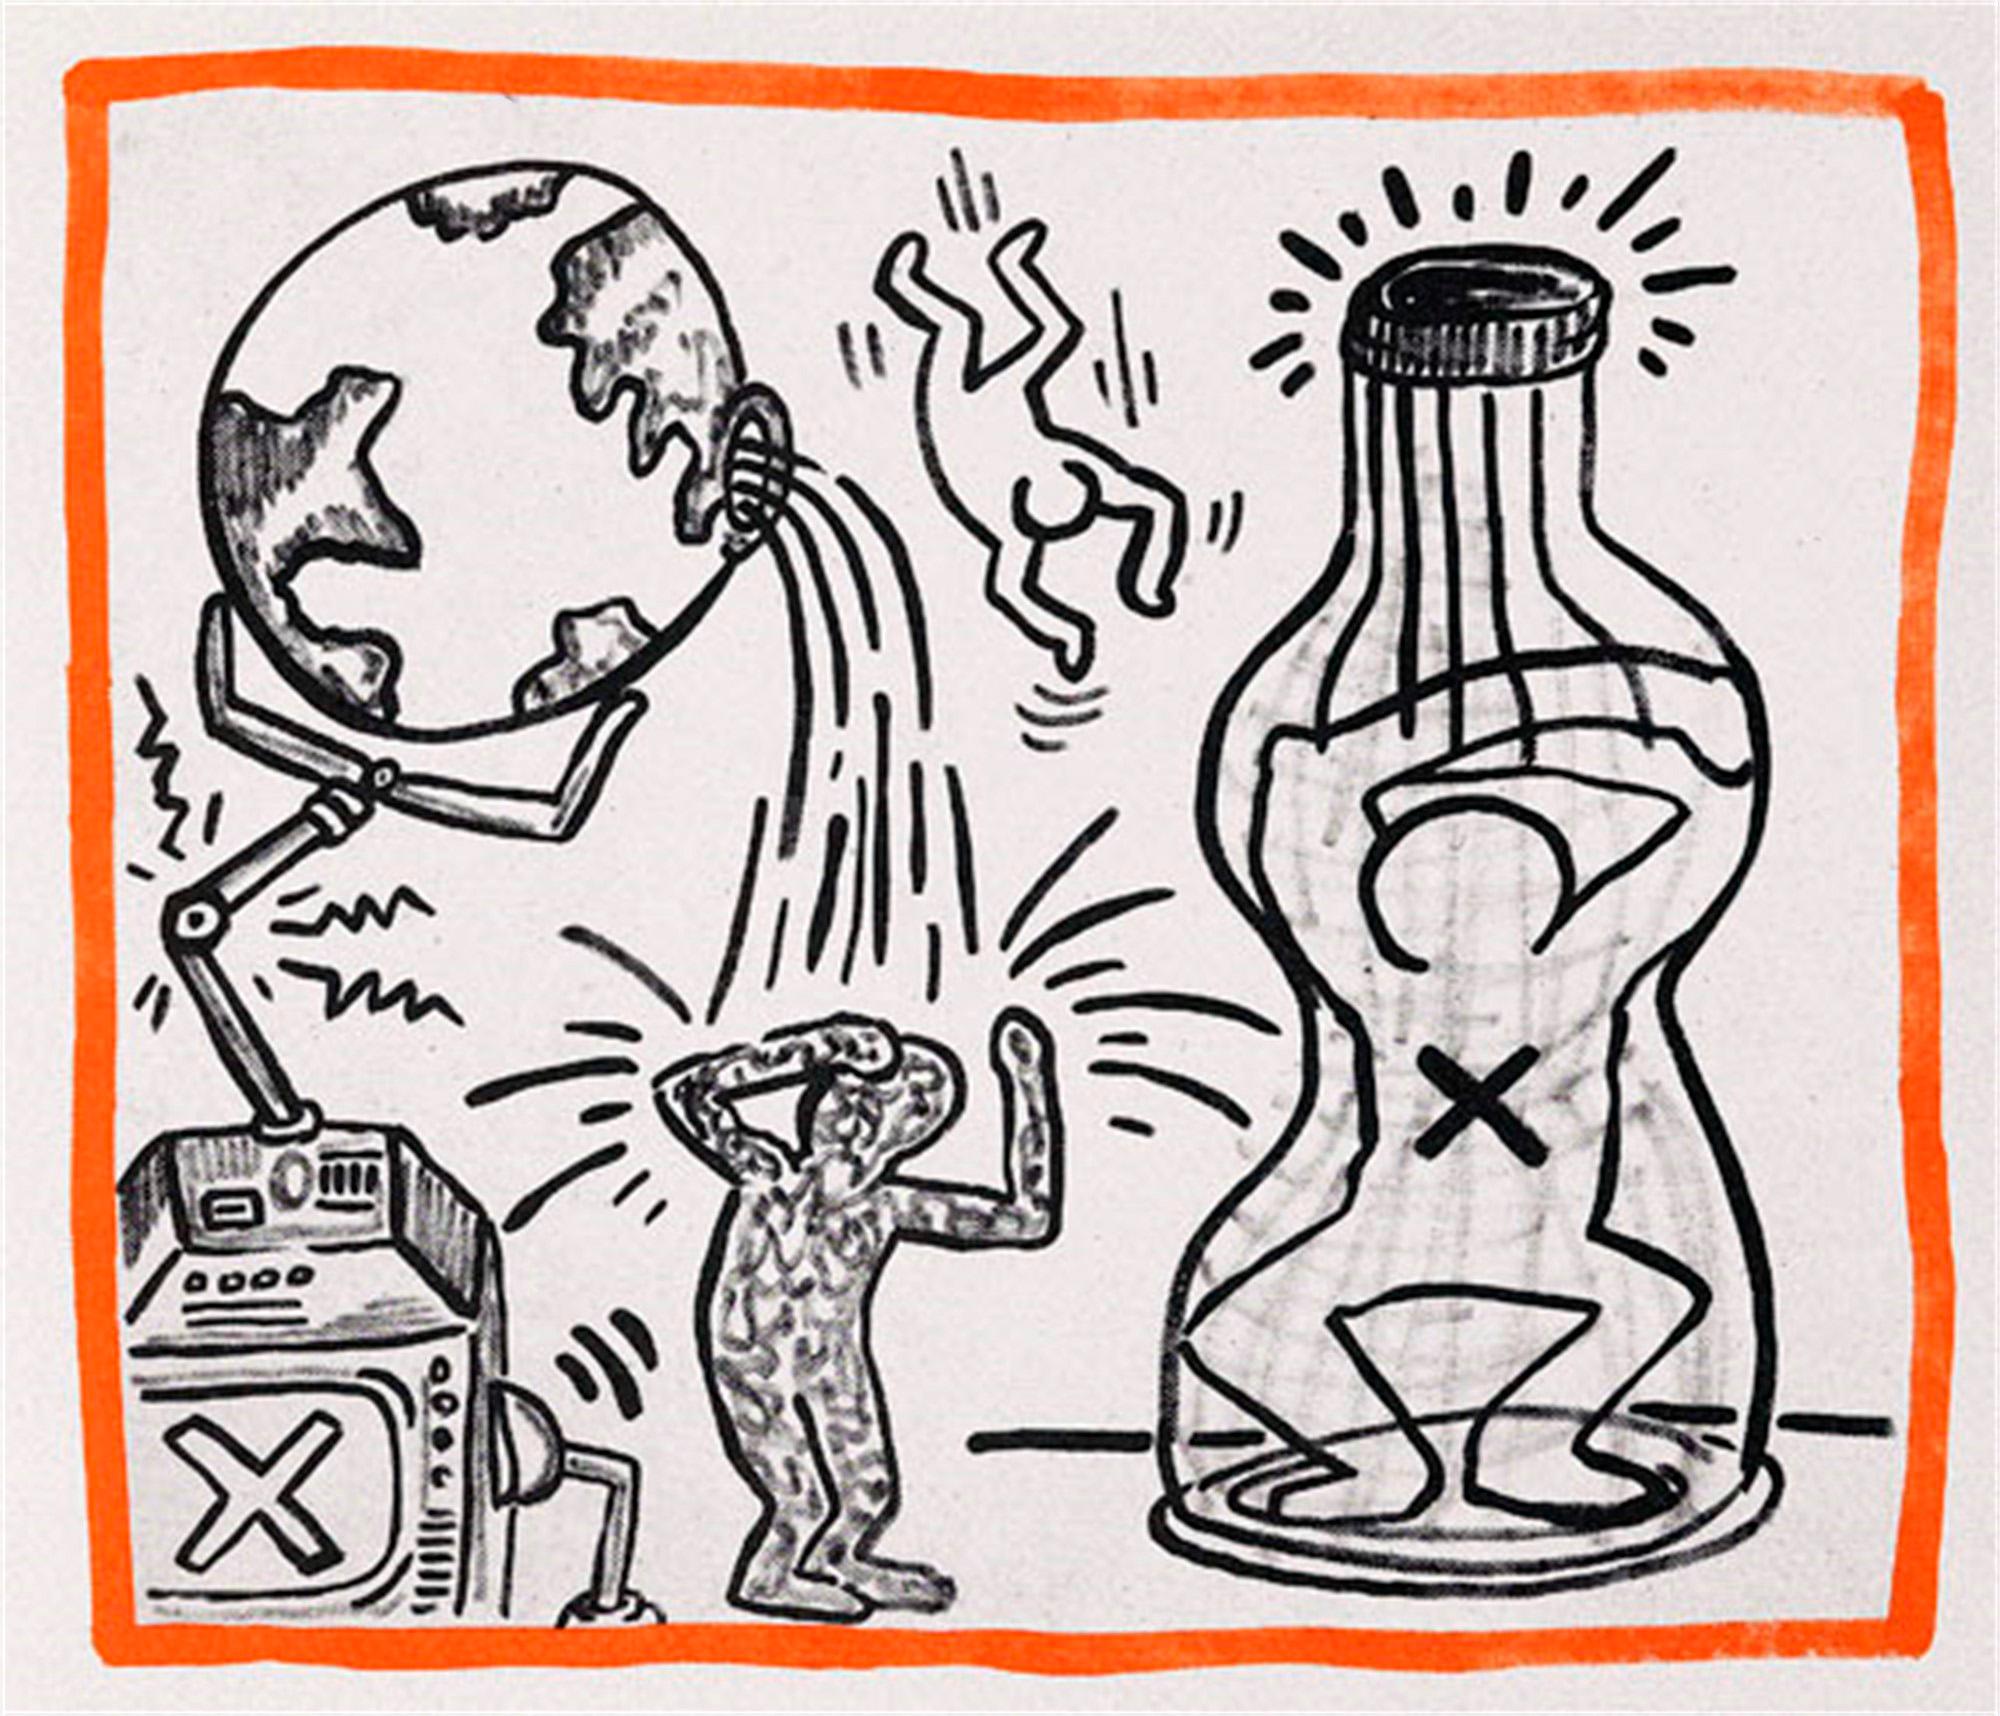 Keith Haring (untitled) Lithograph from Against All Odds, 1990:

Medium: Offset lithograph in colors on thick Rivoli paper. 
Dimensions: 8.5 x 10.25 inches. 
Unsigned from a limited edition of 2,500.
Very good condition with the exception of some